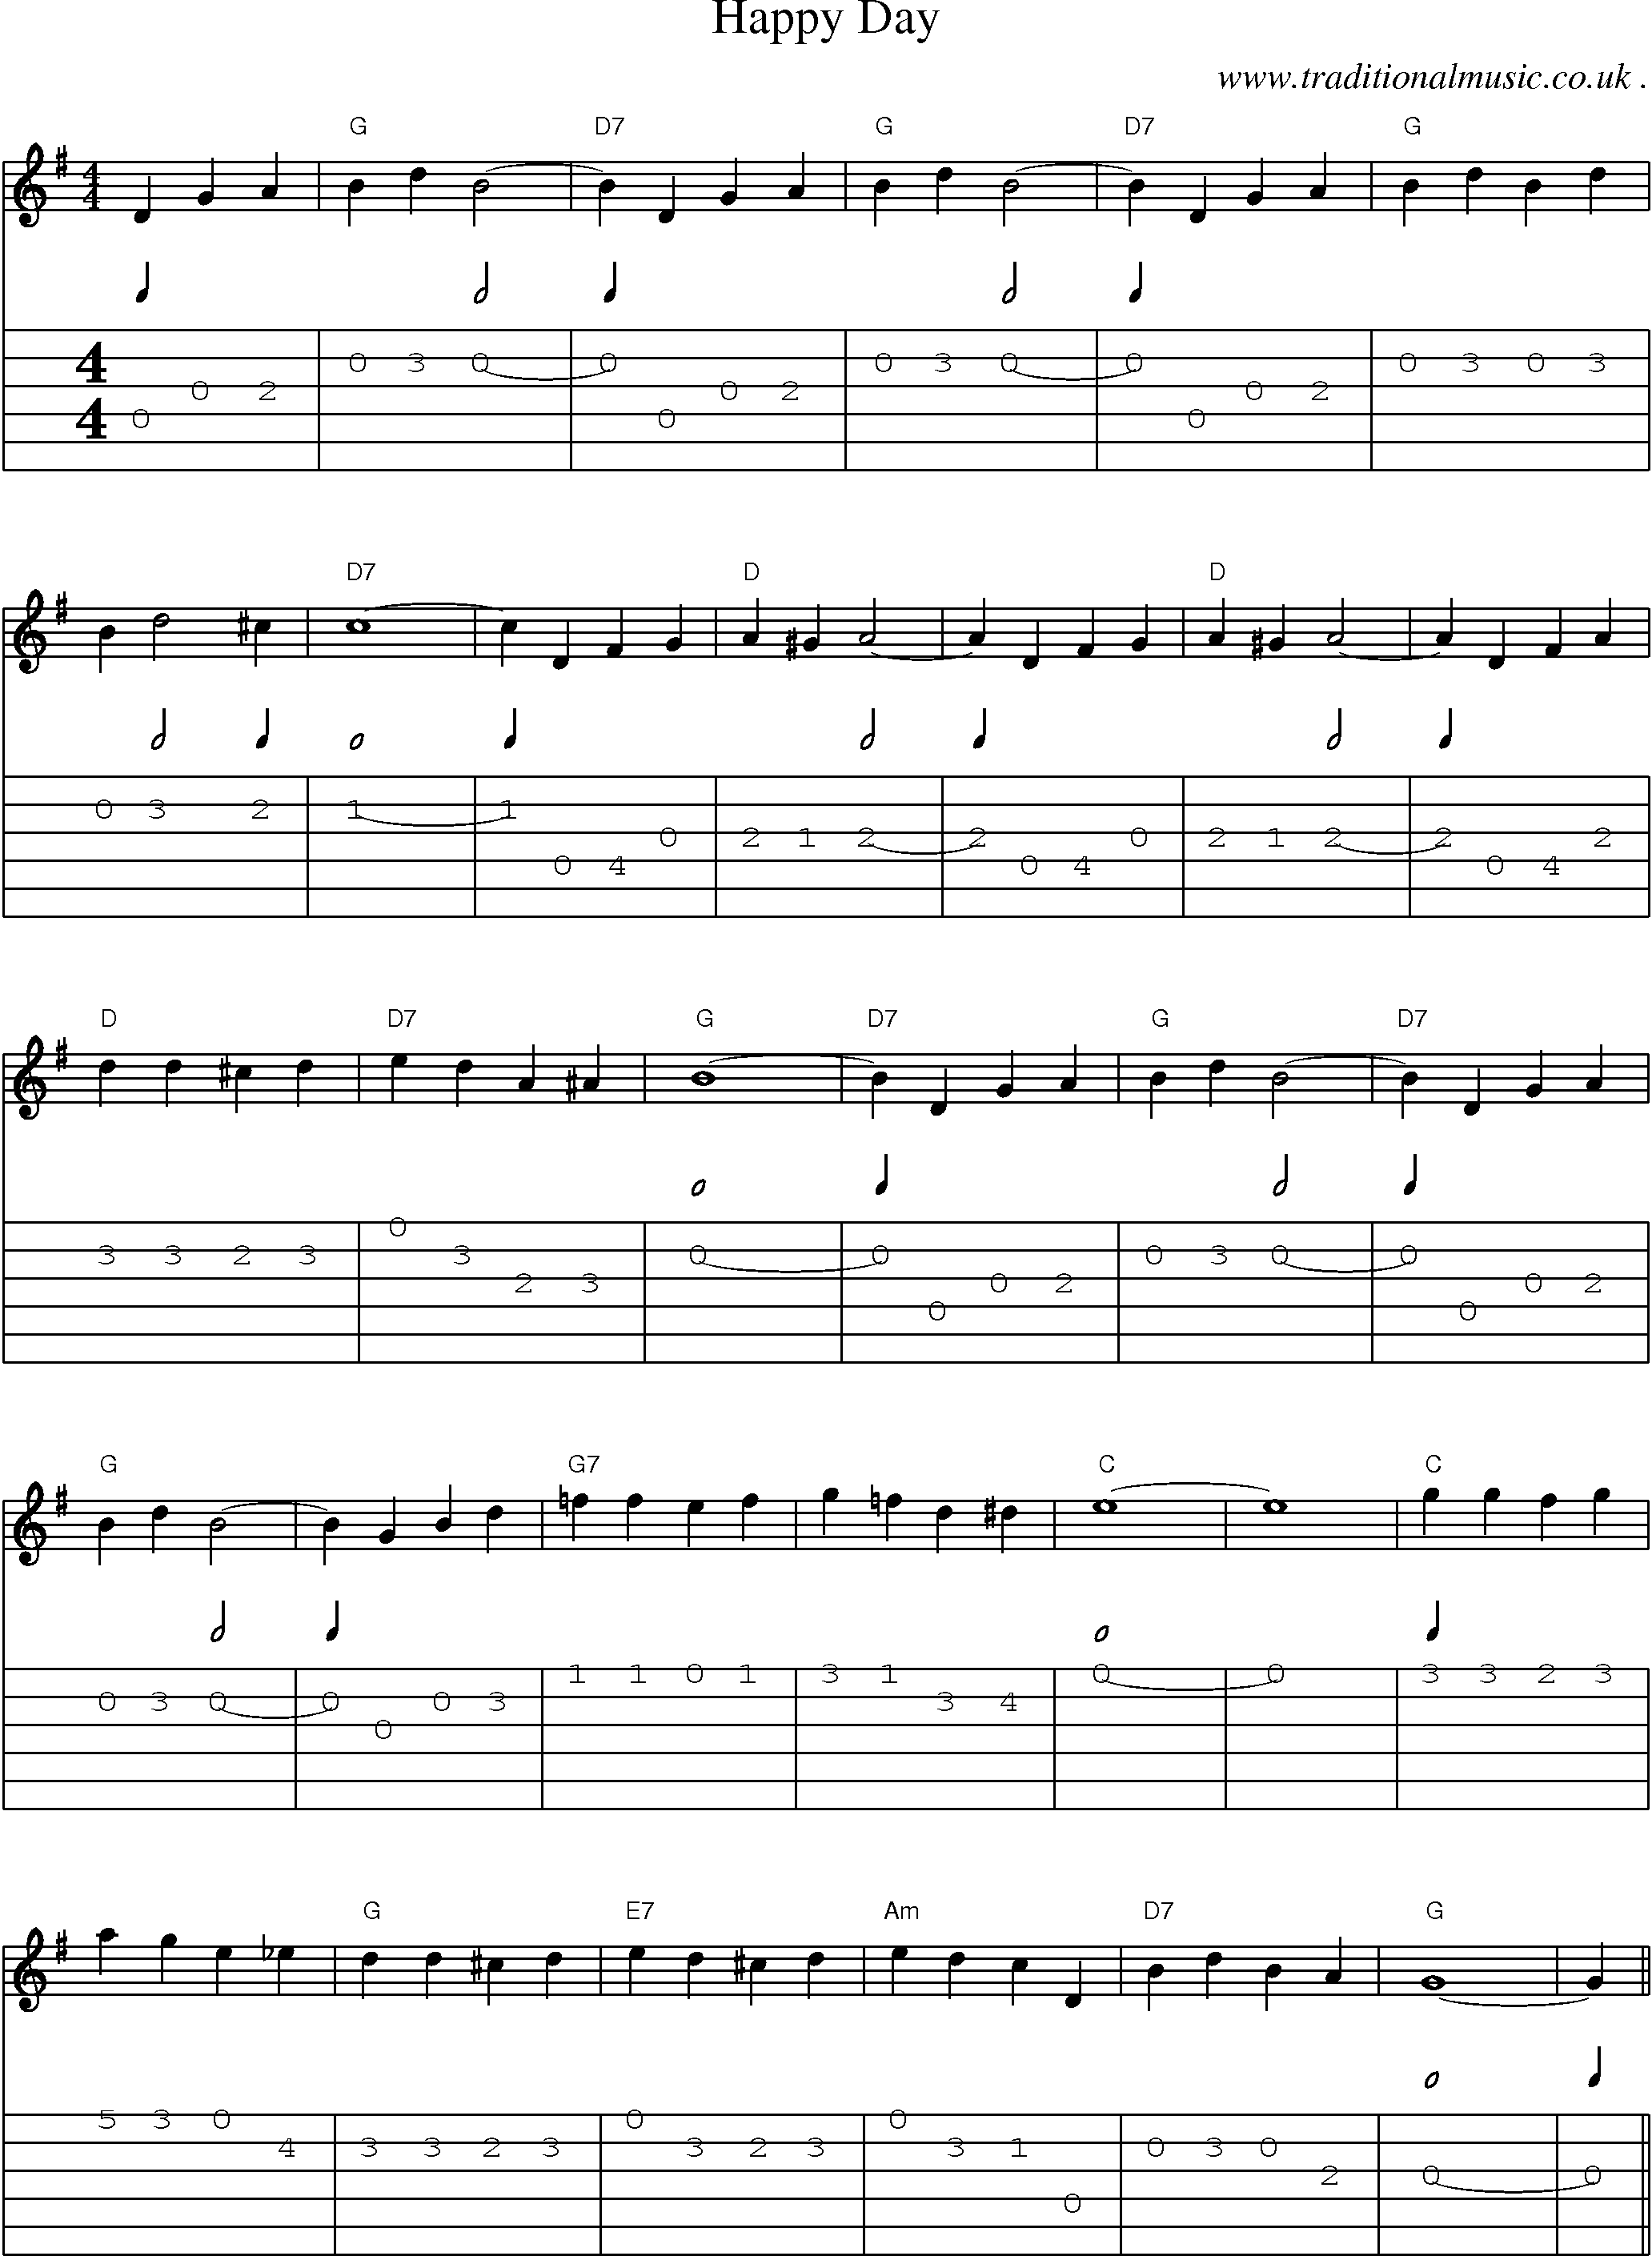 Music Score and Guitar Tabs for Happy Day